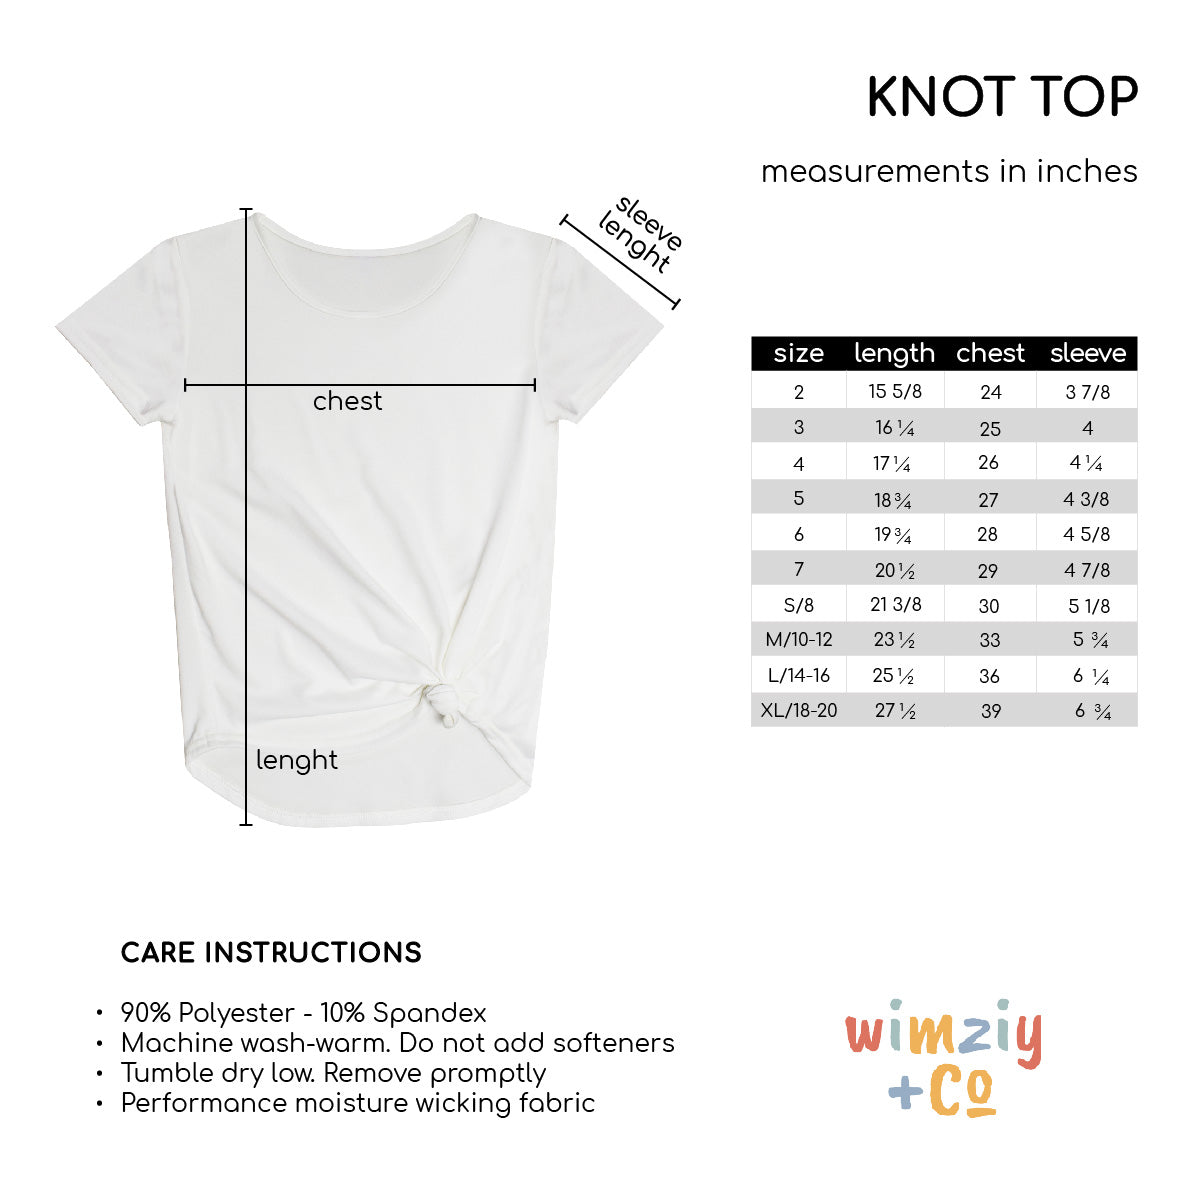 Bring The Fire Long Sleeve Knot Top - Wimziy&Co.